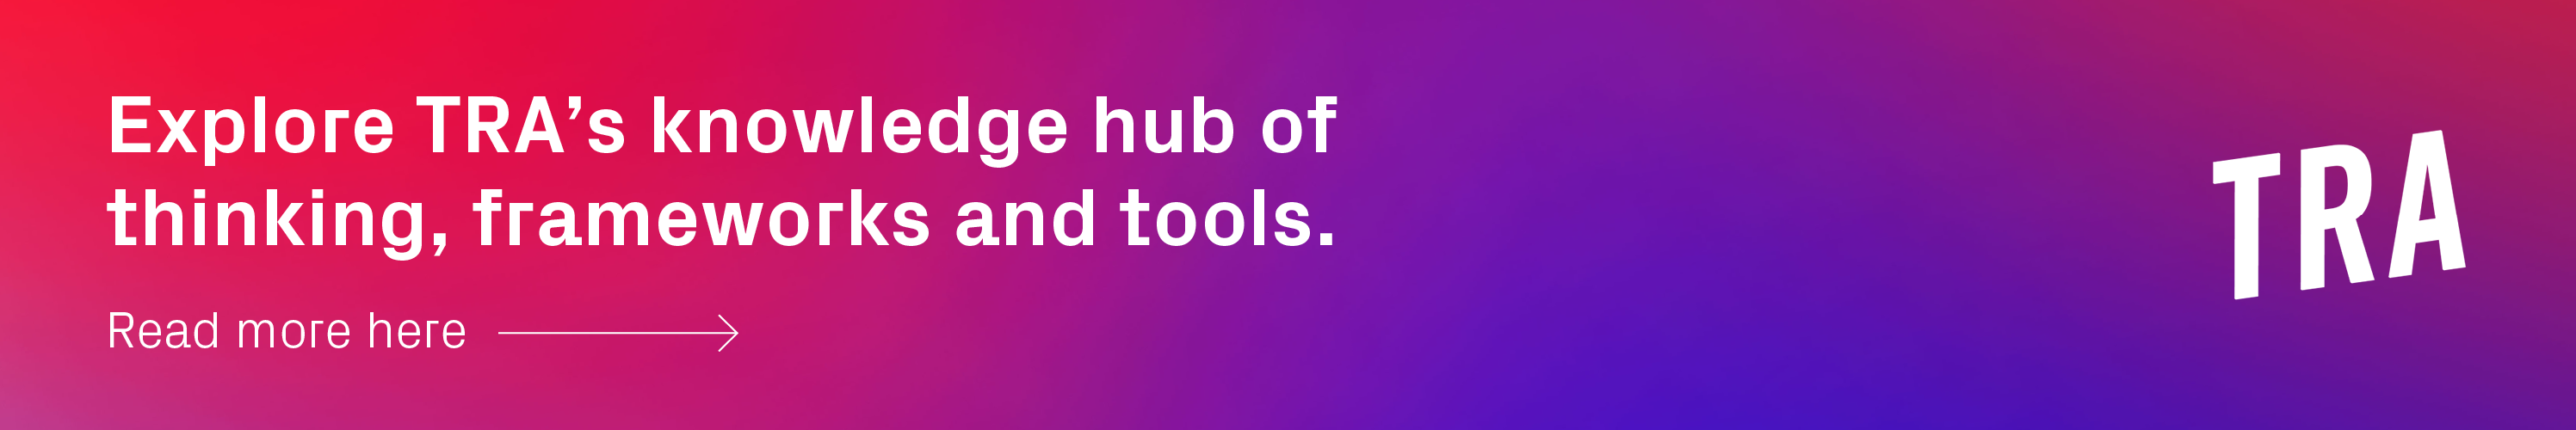 Explore TRA's knowledge hub of thinking, frameworks and tools